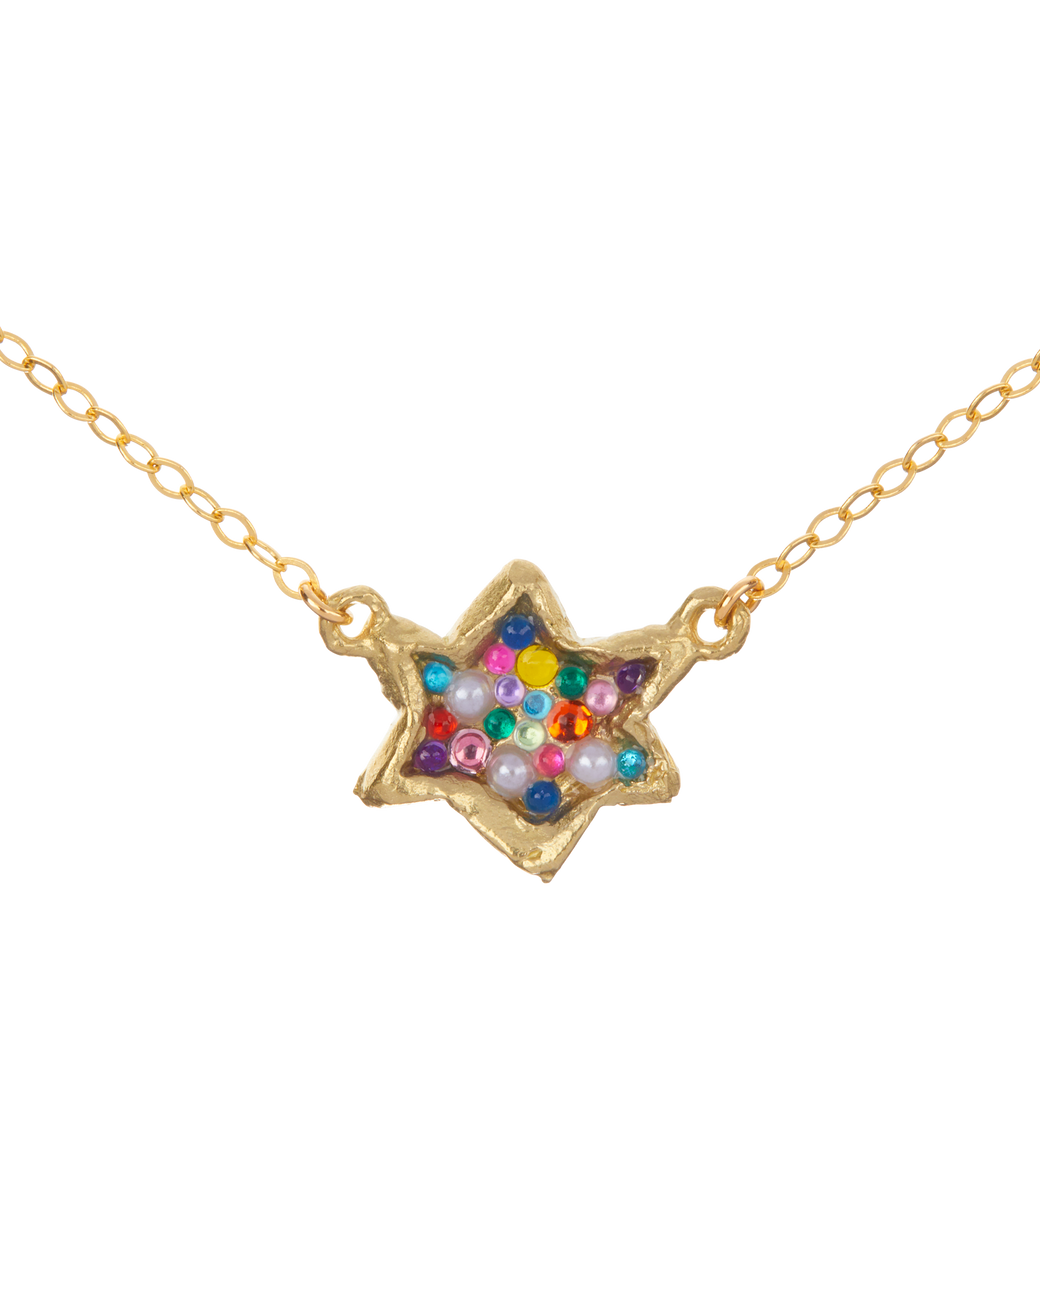 Stardust Memory Necklace